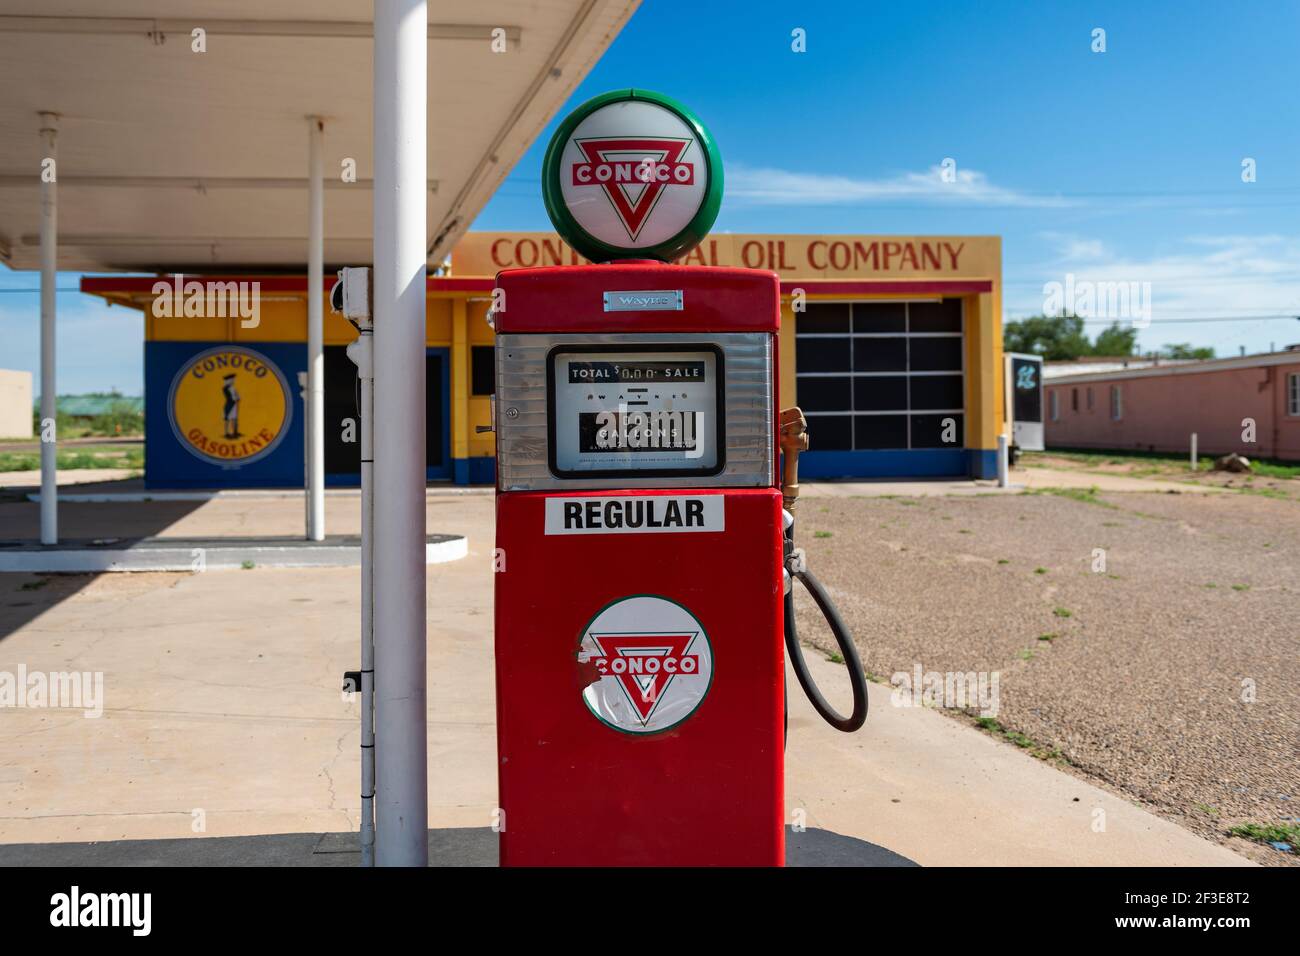 Tucumcari, New Mexico - July 9, 2014: An old Conoco gas pump at a service station along the historic us route 66 in in the city of Tucumcari, New Mexi Stock Photo